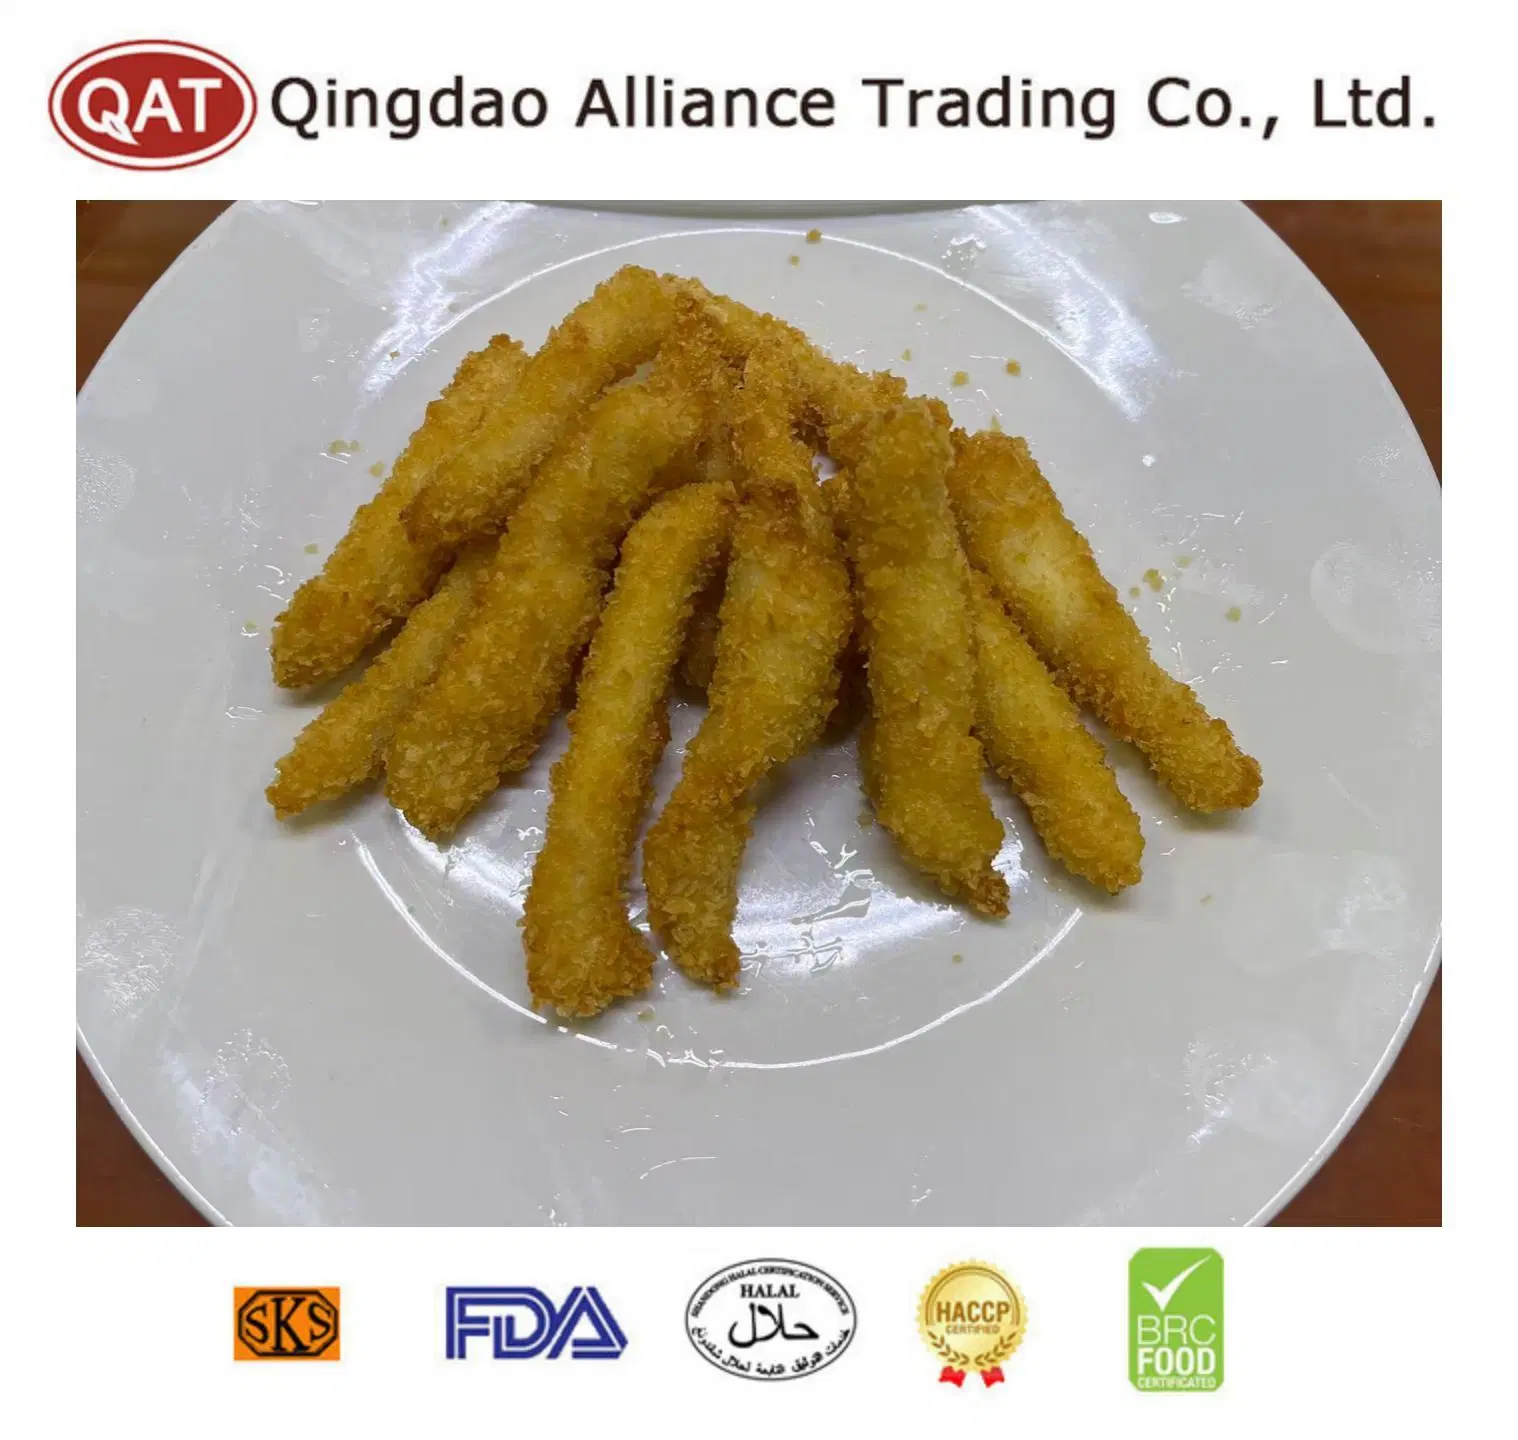 Top Quality IQF Halal Frozen Original Chicken Breast Strips with Certificate